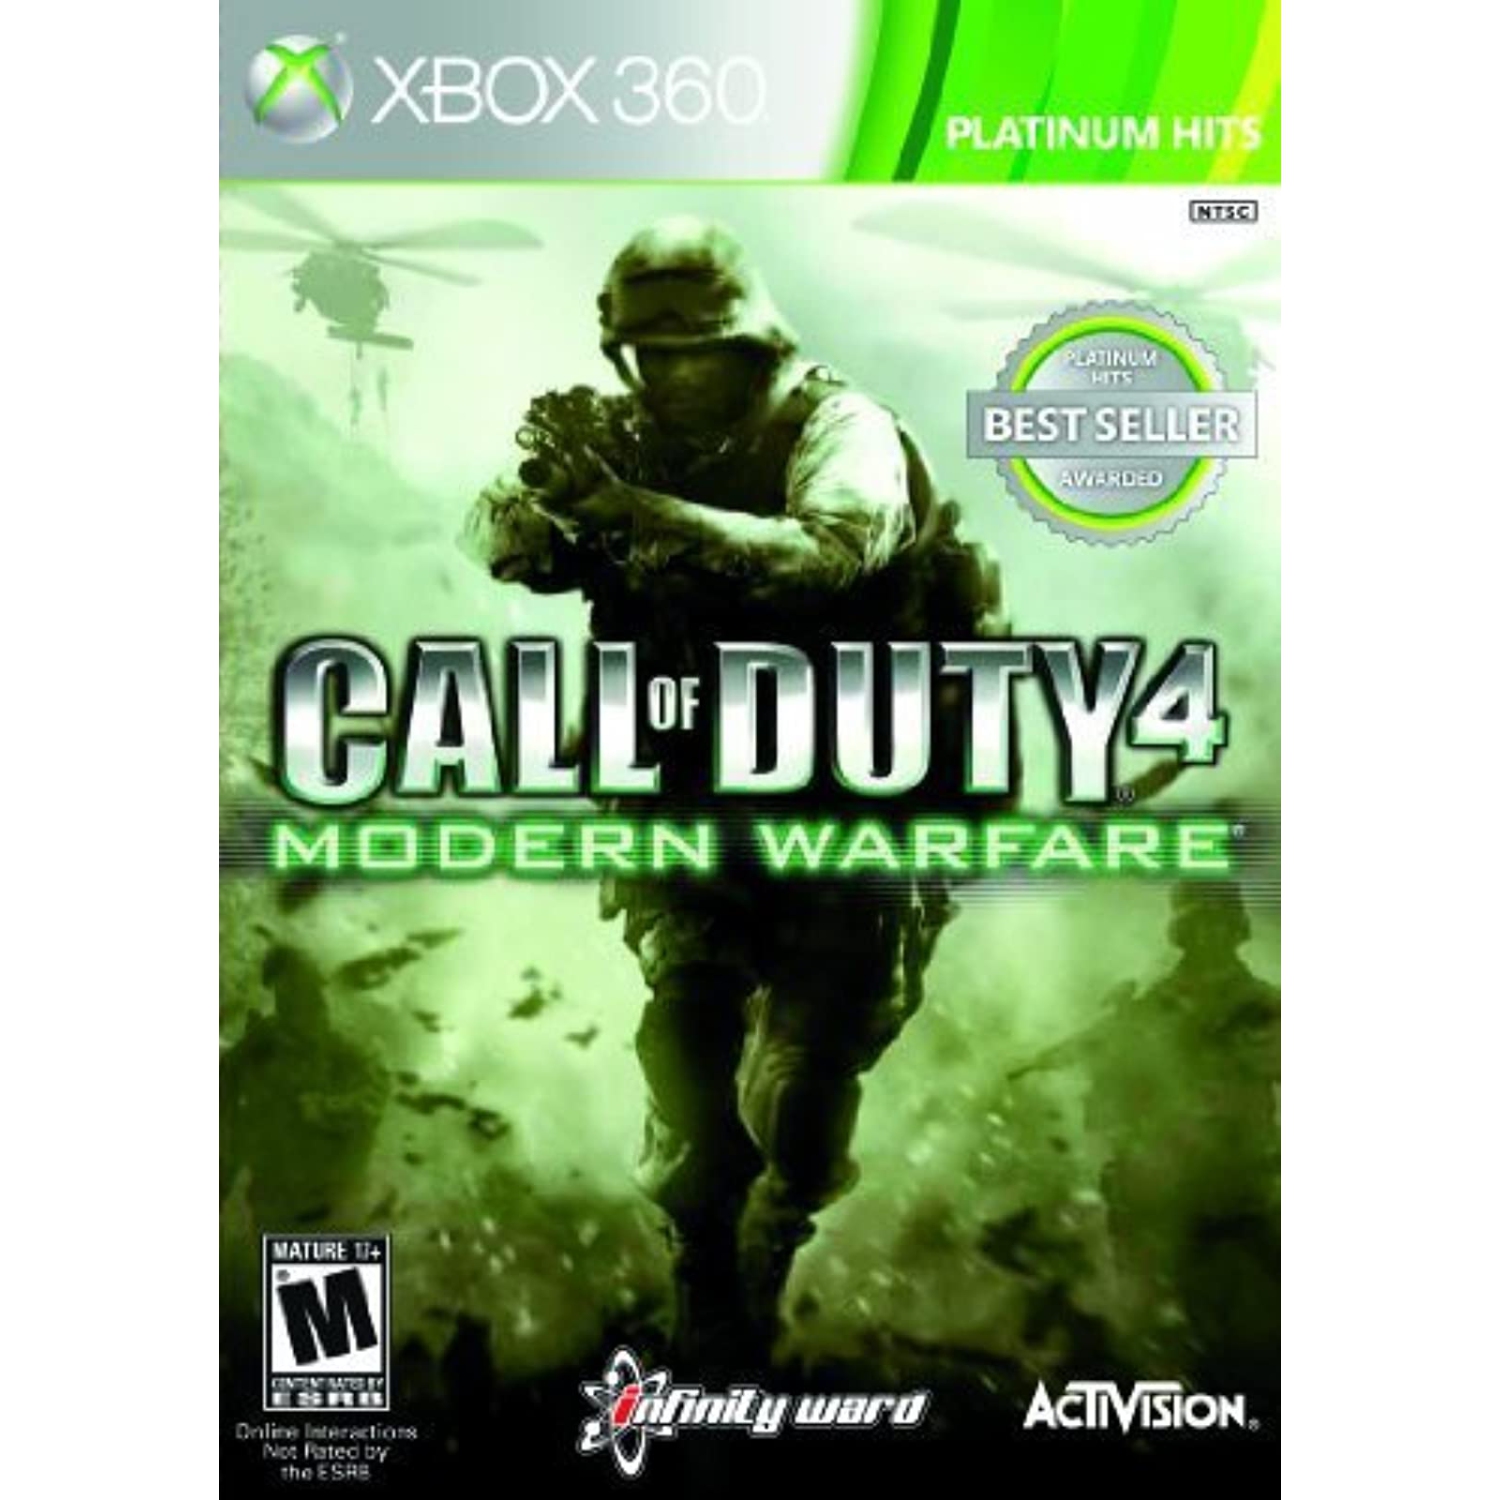 Call Of Duty 4: Modern Warfare Game For Xbox 360 - Previously Played